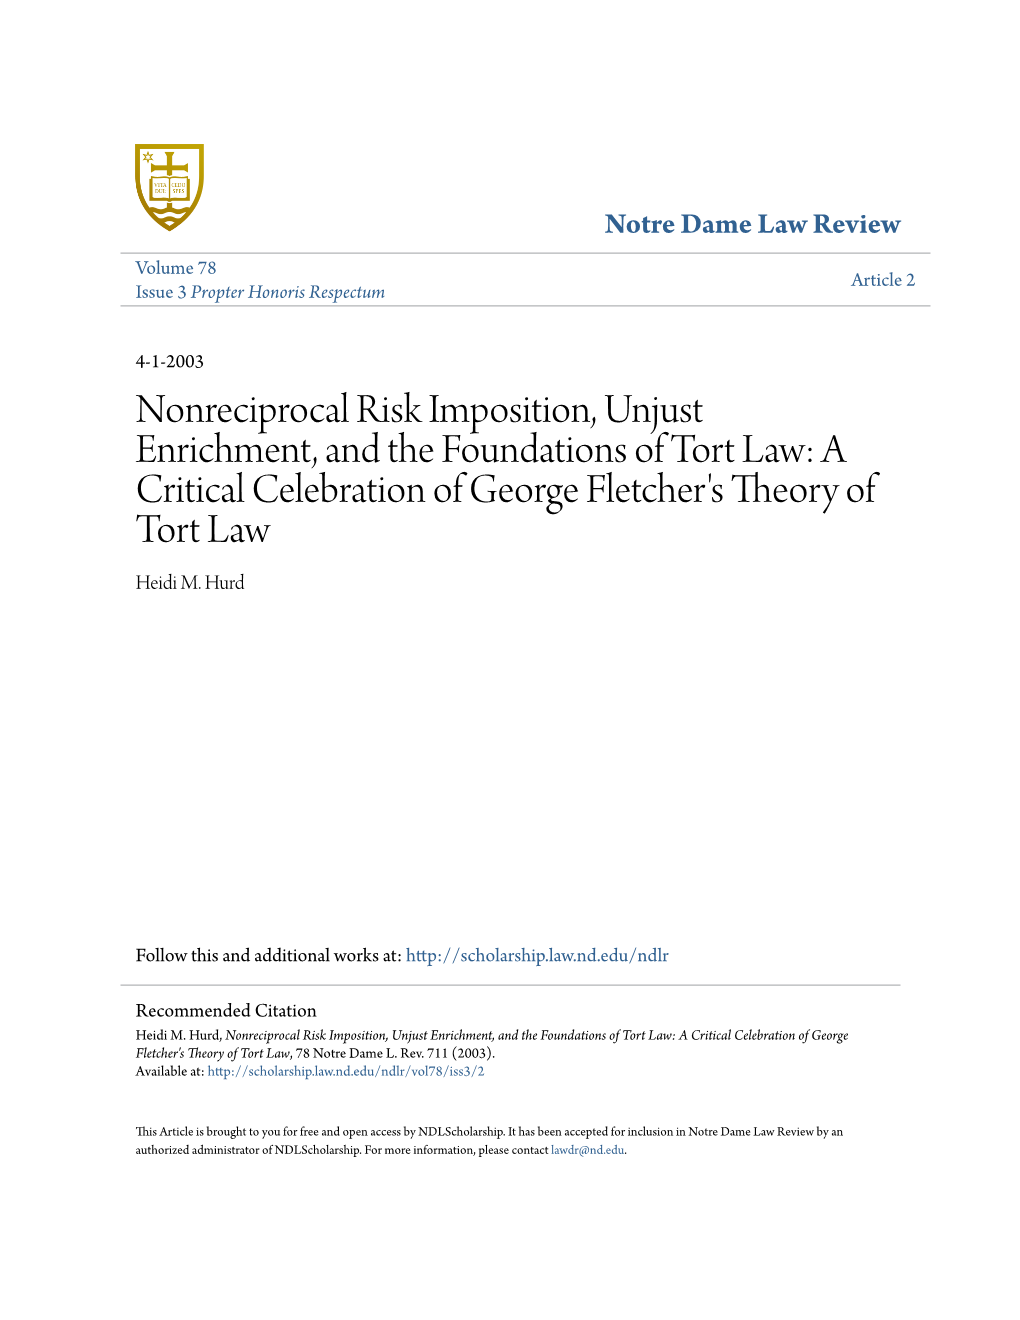 Nonreciprocal Risk Imposition, Unjust Enrichment, and the Foundations of Tort Law: a Critical Celebration of George Fletcher's Theory of Tort Law Heidi M